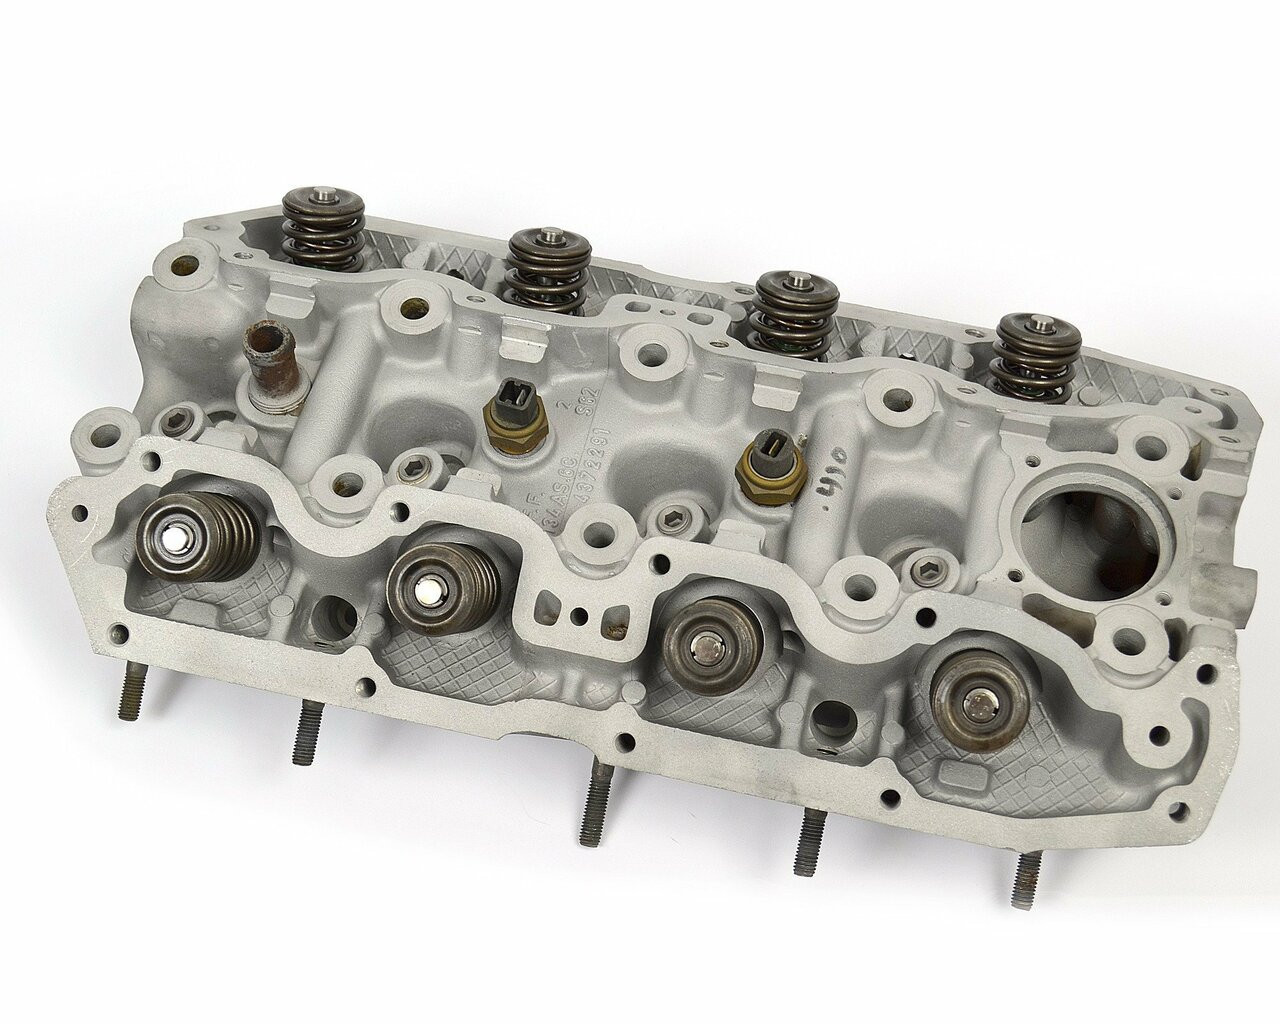 High performance 1995cc cylinder head
FIAT Spider 2000 and Pininfarina 1980-1985 - with Fuel Injected engines - Auto Ricambi